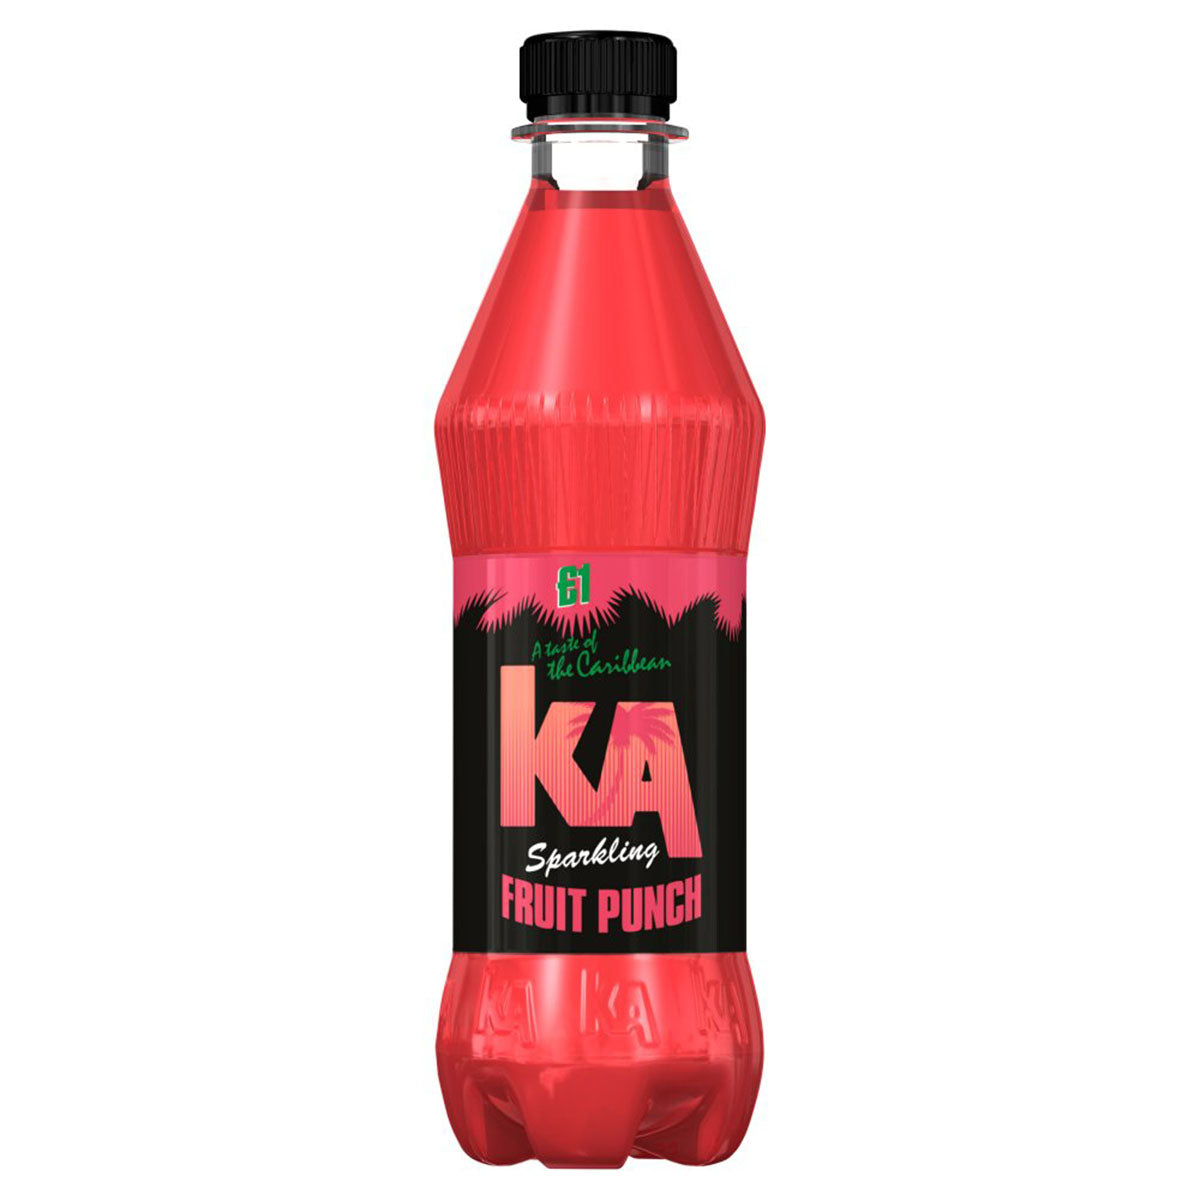 KA - Sparkling Fruit Punch - 500ml - Continental Food Store